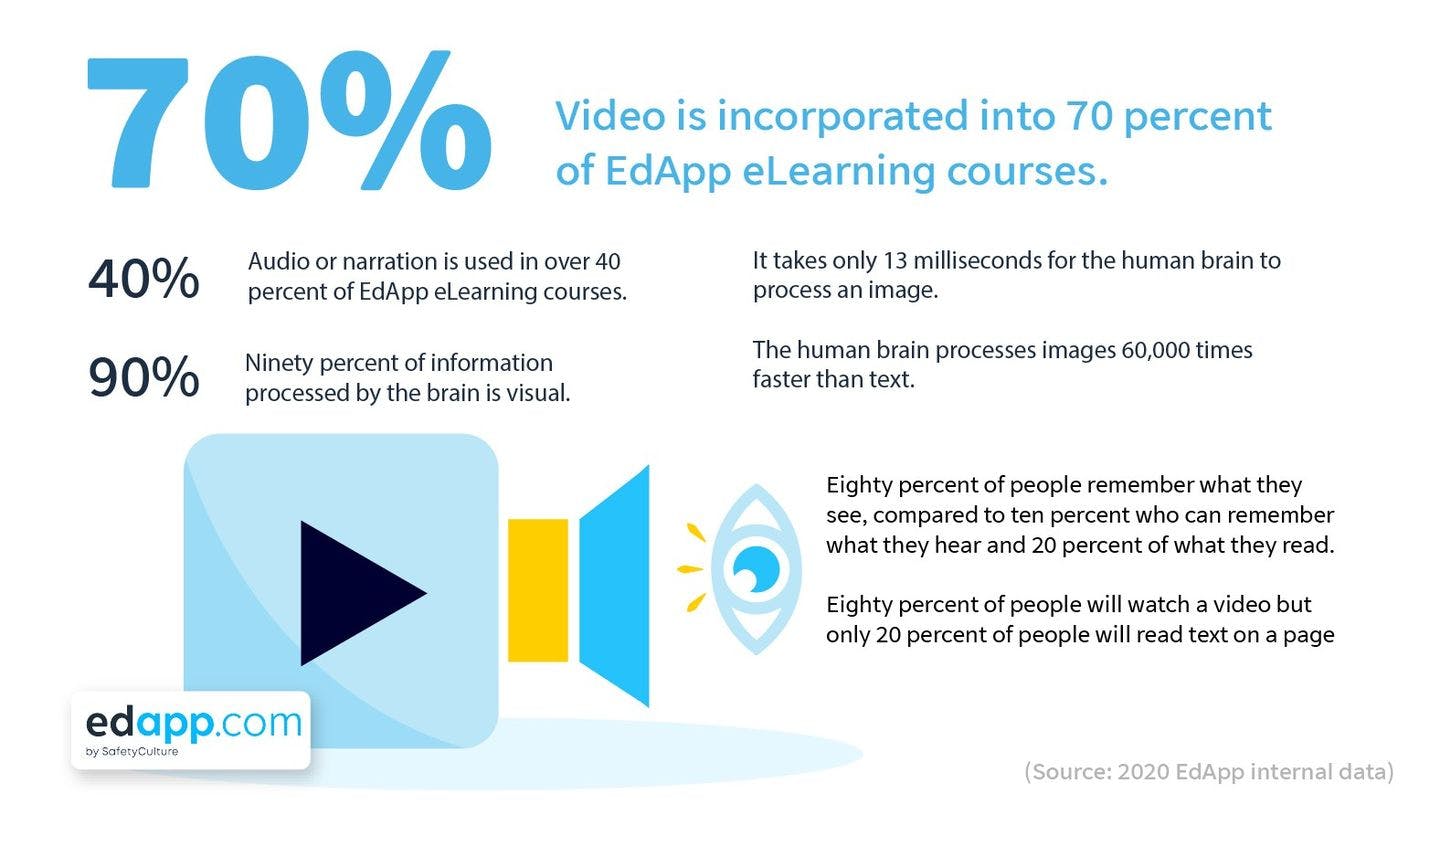 eLearning statistics 2020 - SC Training (formerly EdApp) - Video, image, audio, narration in learning